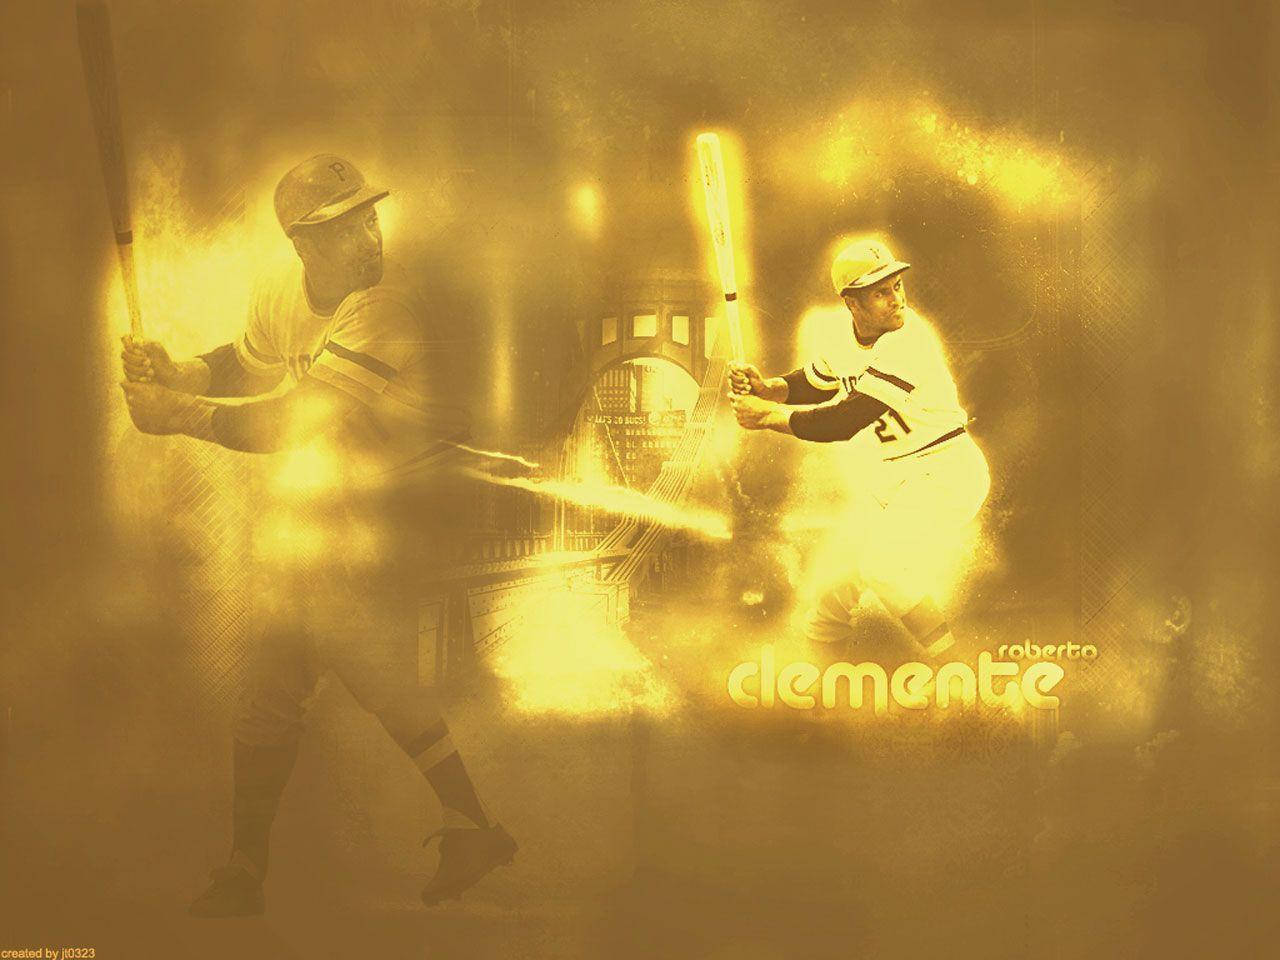 Caption: Legendary Roberto Clemente In A Golden Aesthetic Background